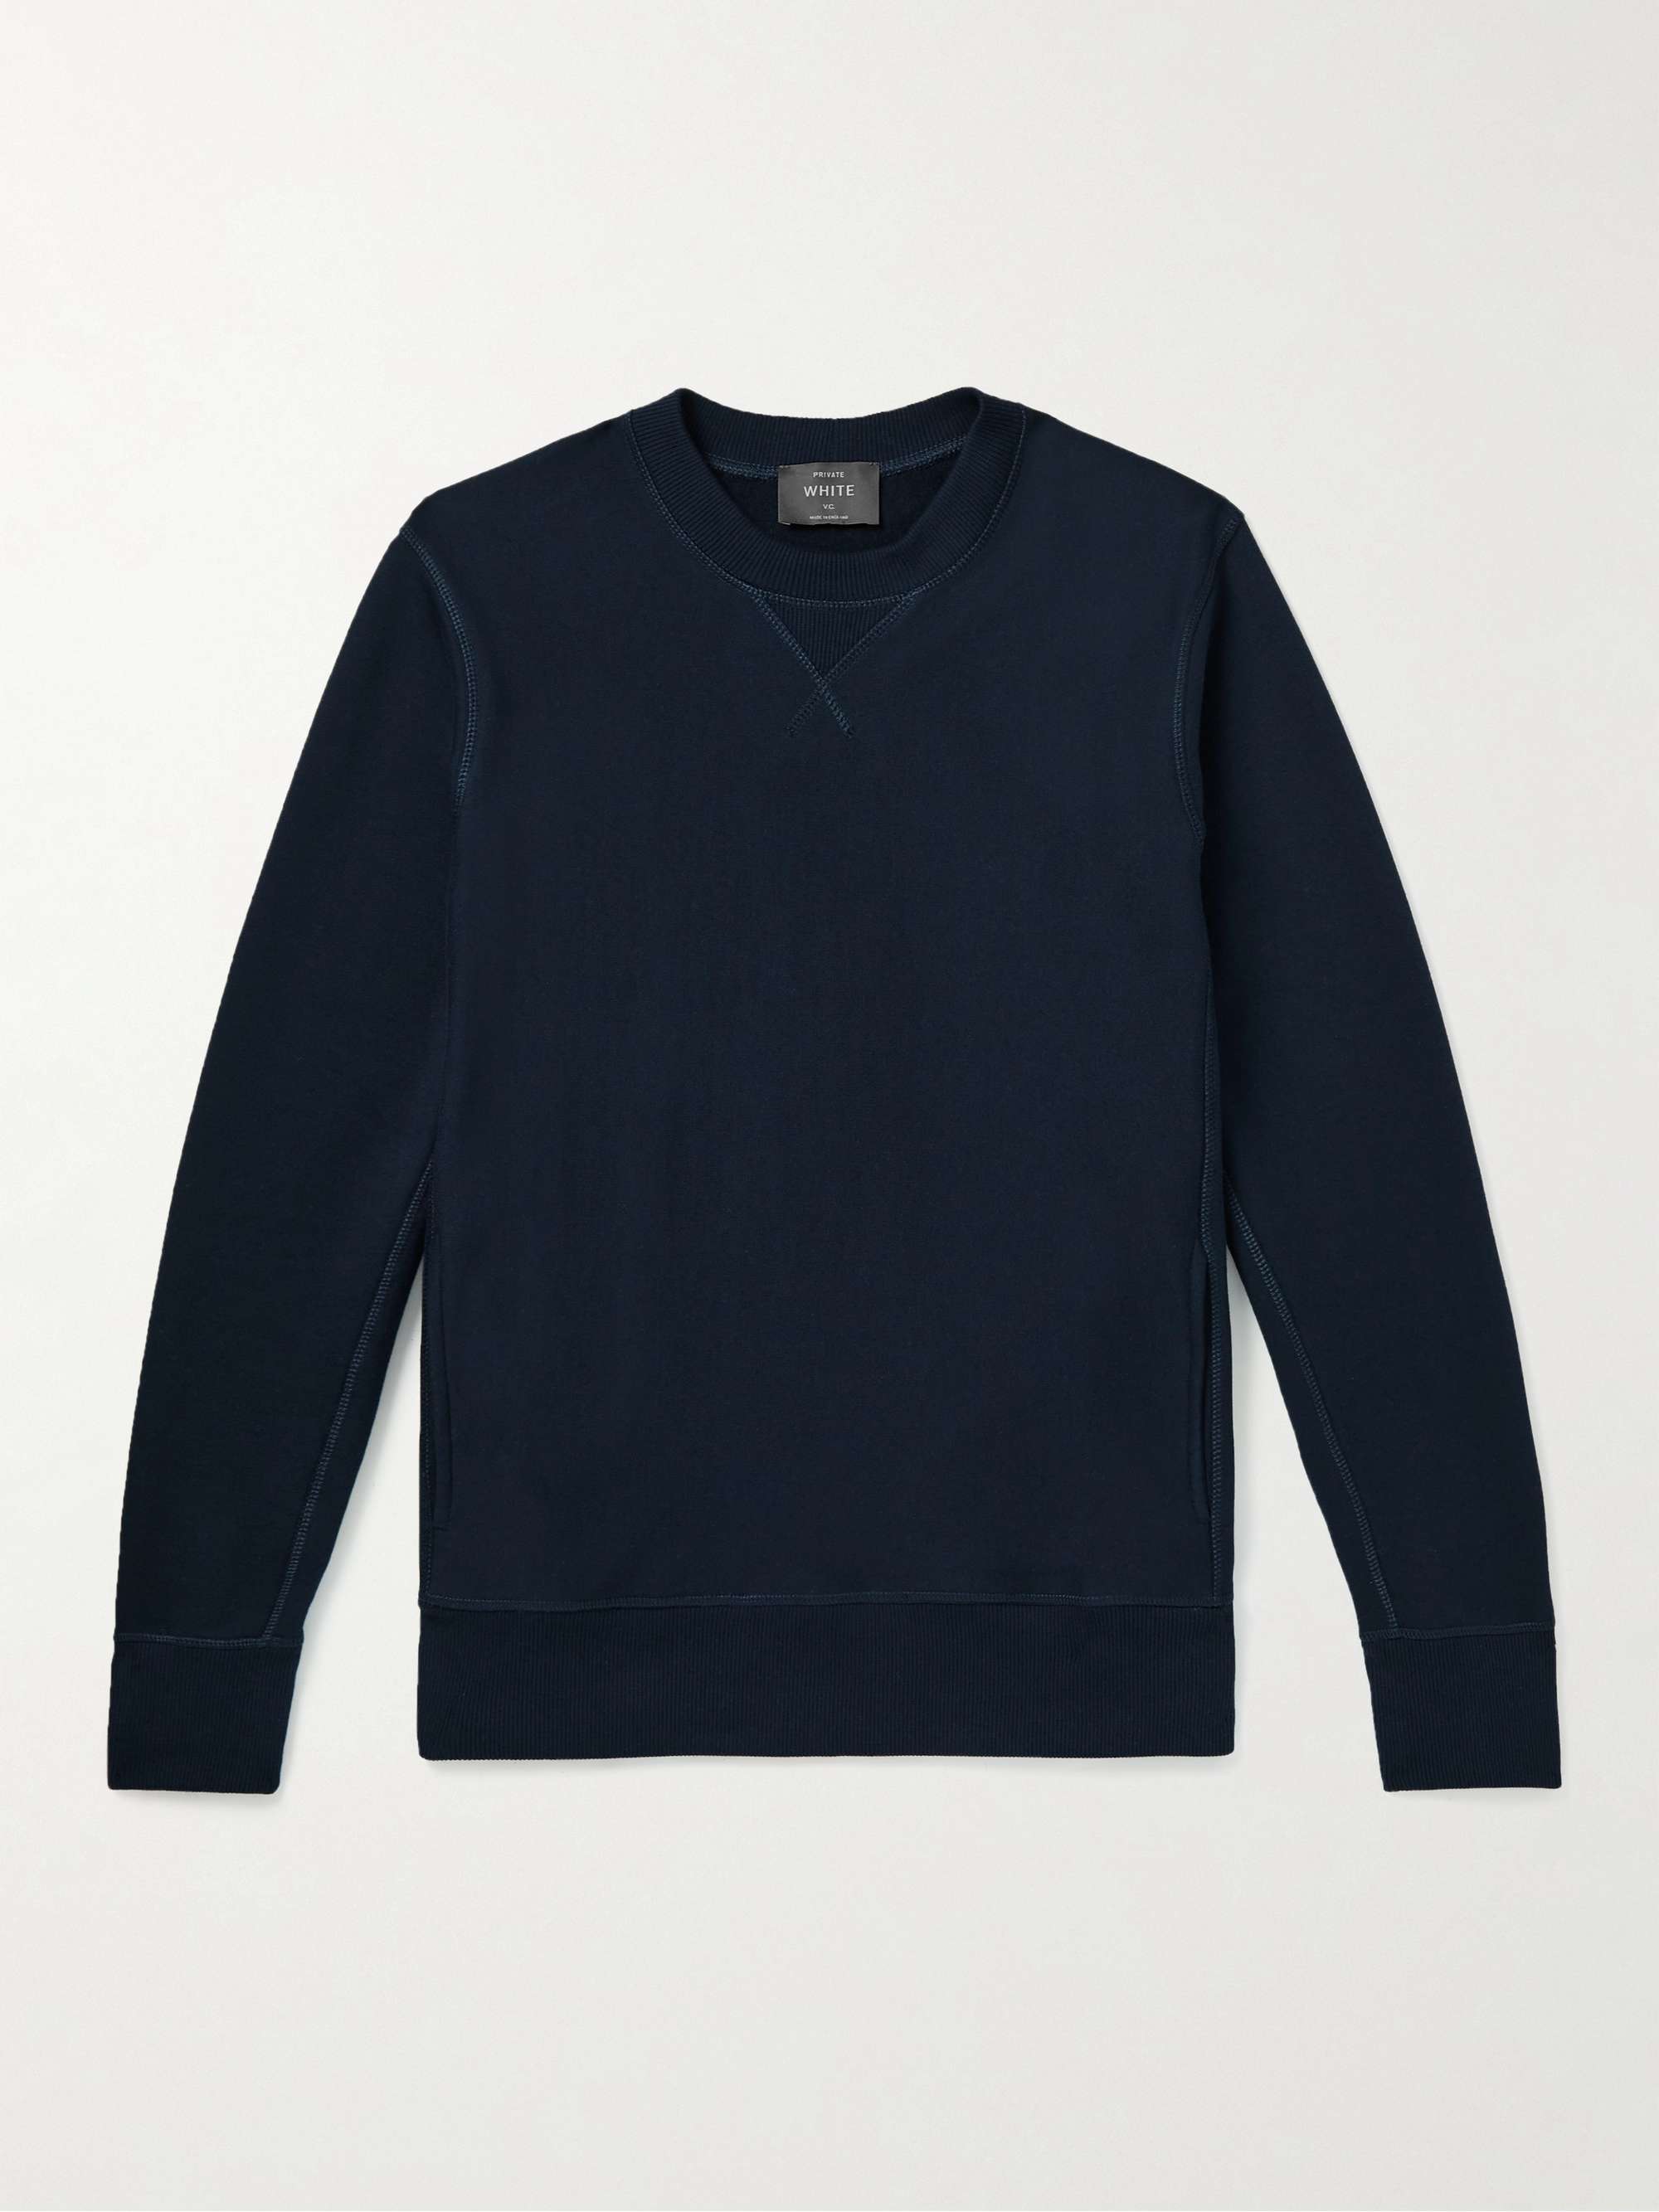 PRIVATE WHITE V.C. Cotton, Wool and Cashmere-Blend Jersey Sweatshirt